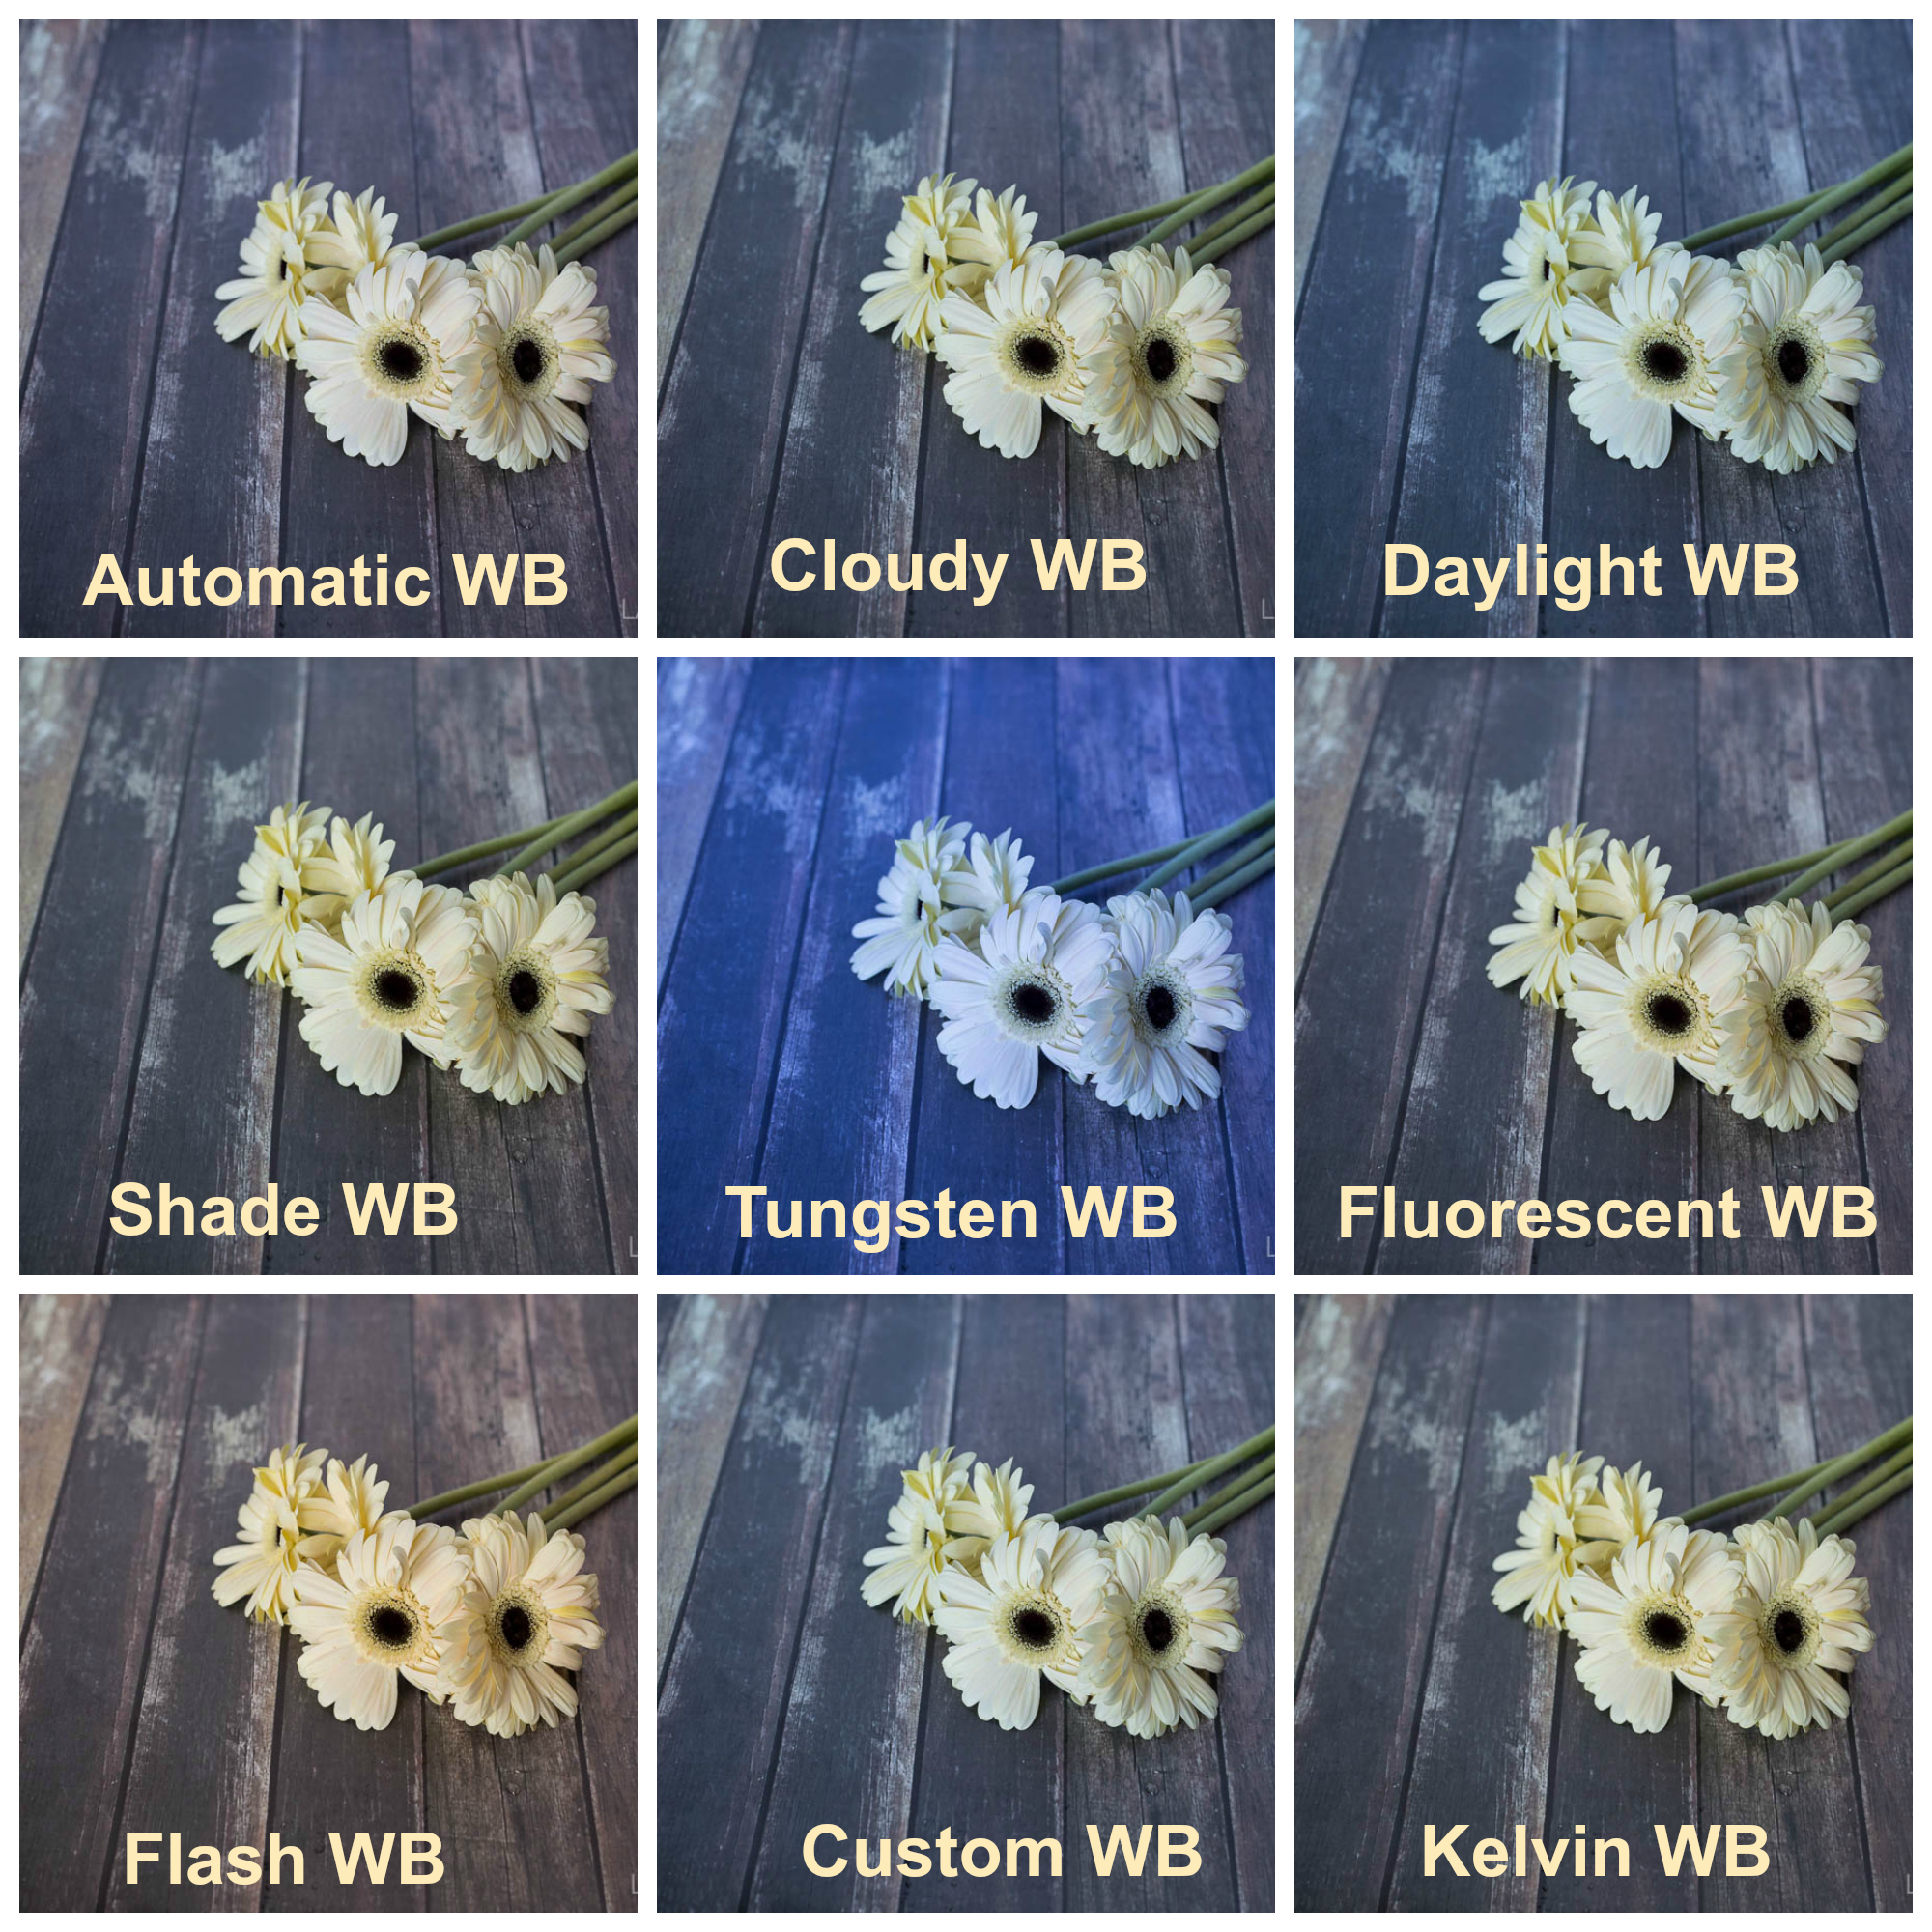 Comparison of images taken with different white balance settings | Photography Tips 